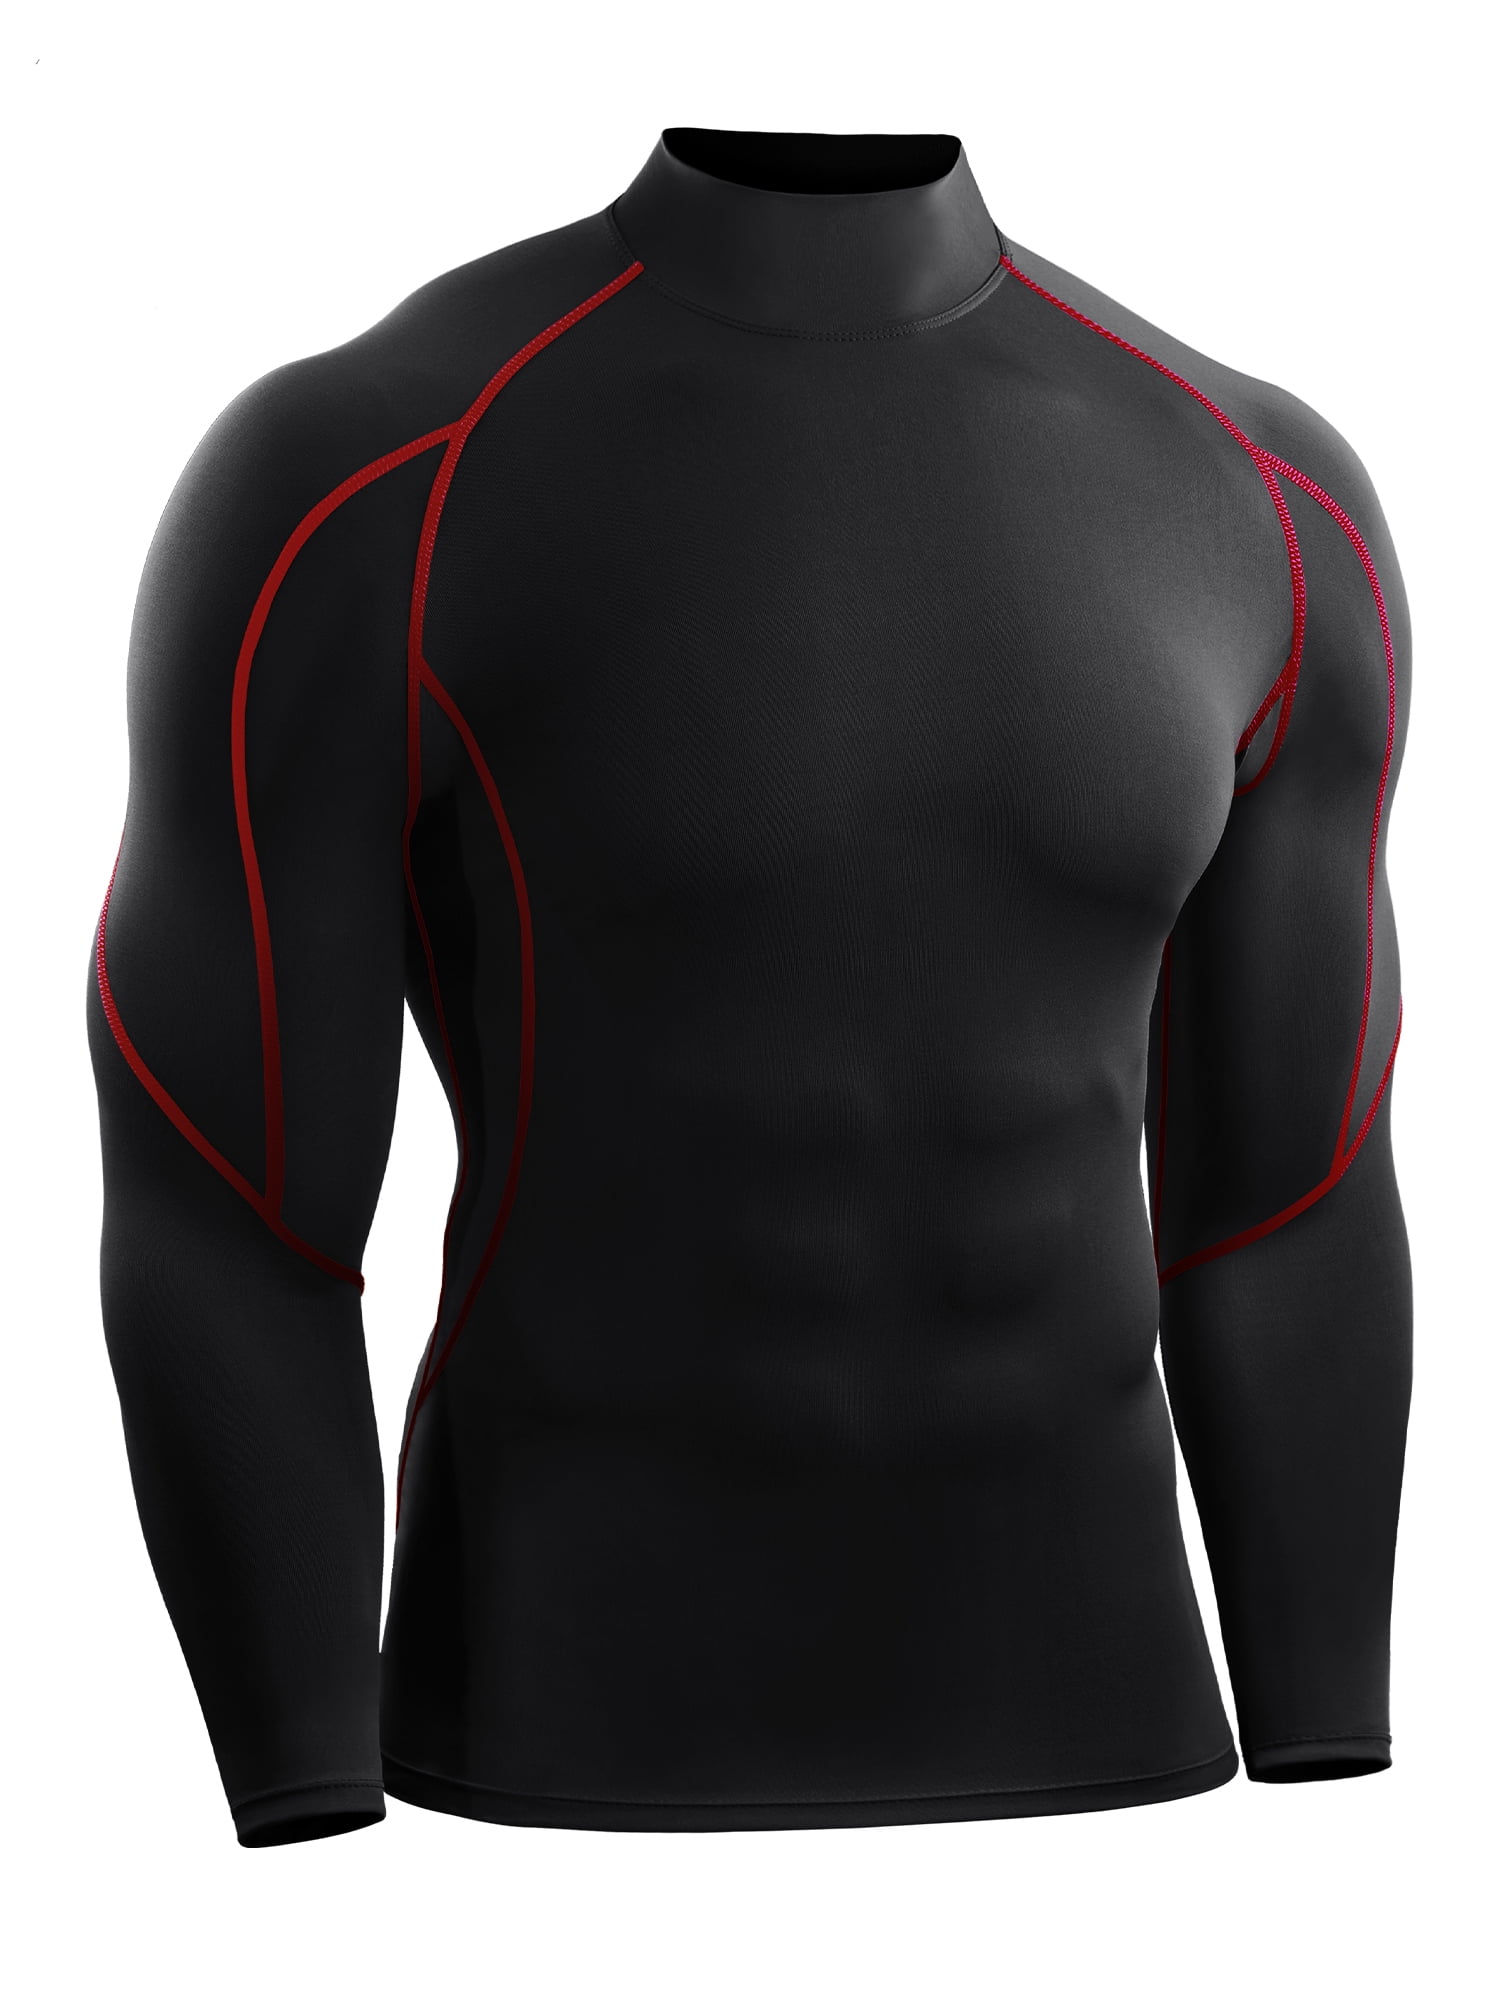 Mens Boys Body Armour Compression Baselayers Thermal Under Shirt Top Skins Yoga 